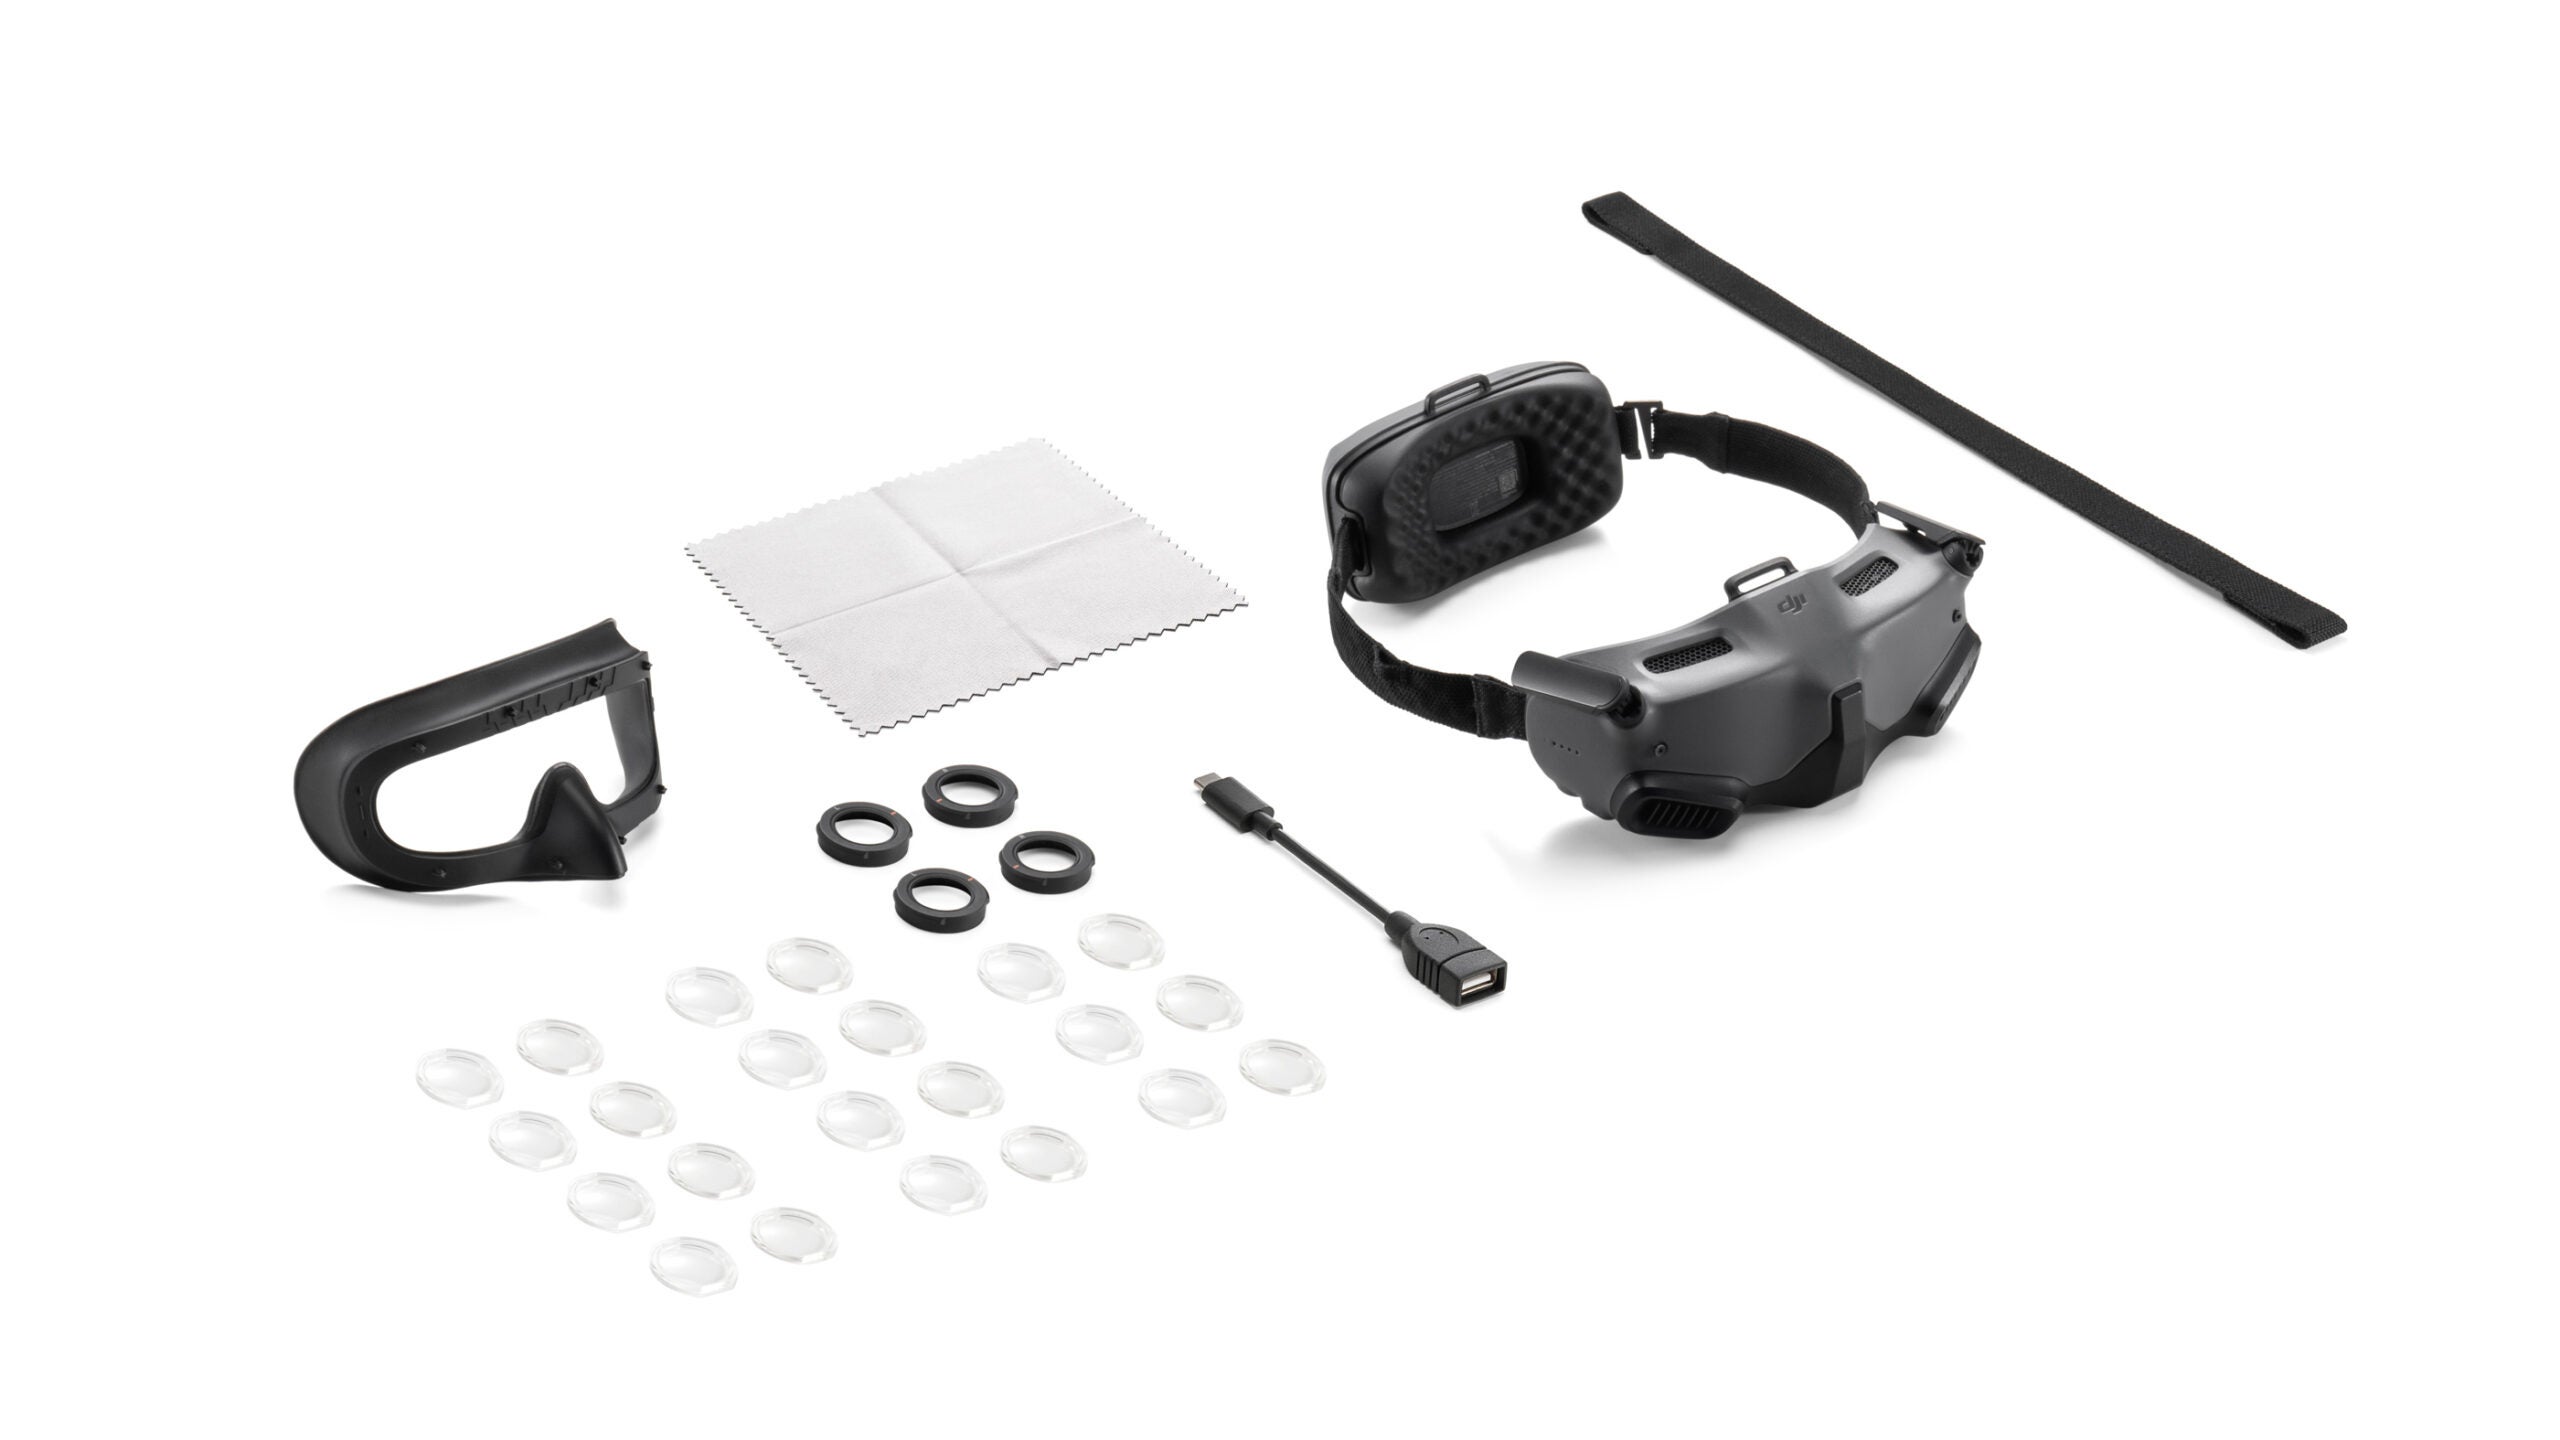 Items that come in the box with the DJI Goggles Integra